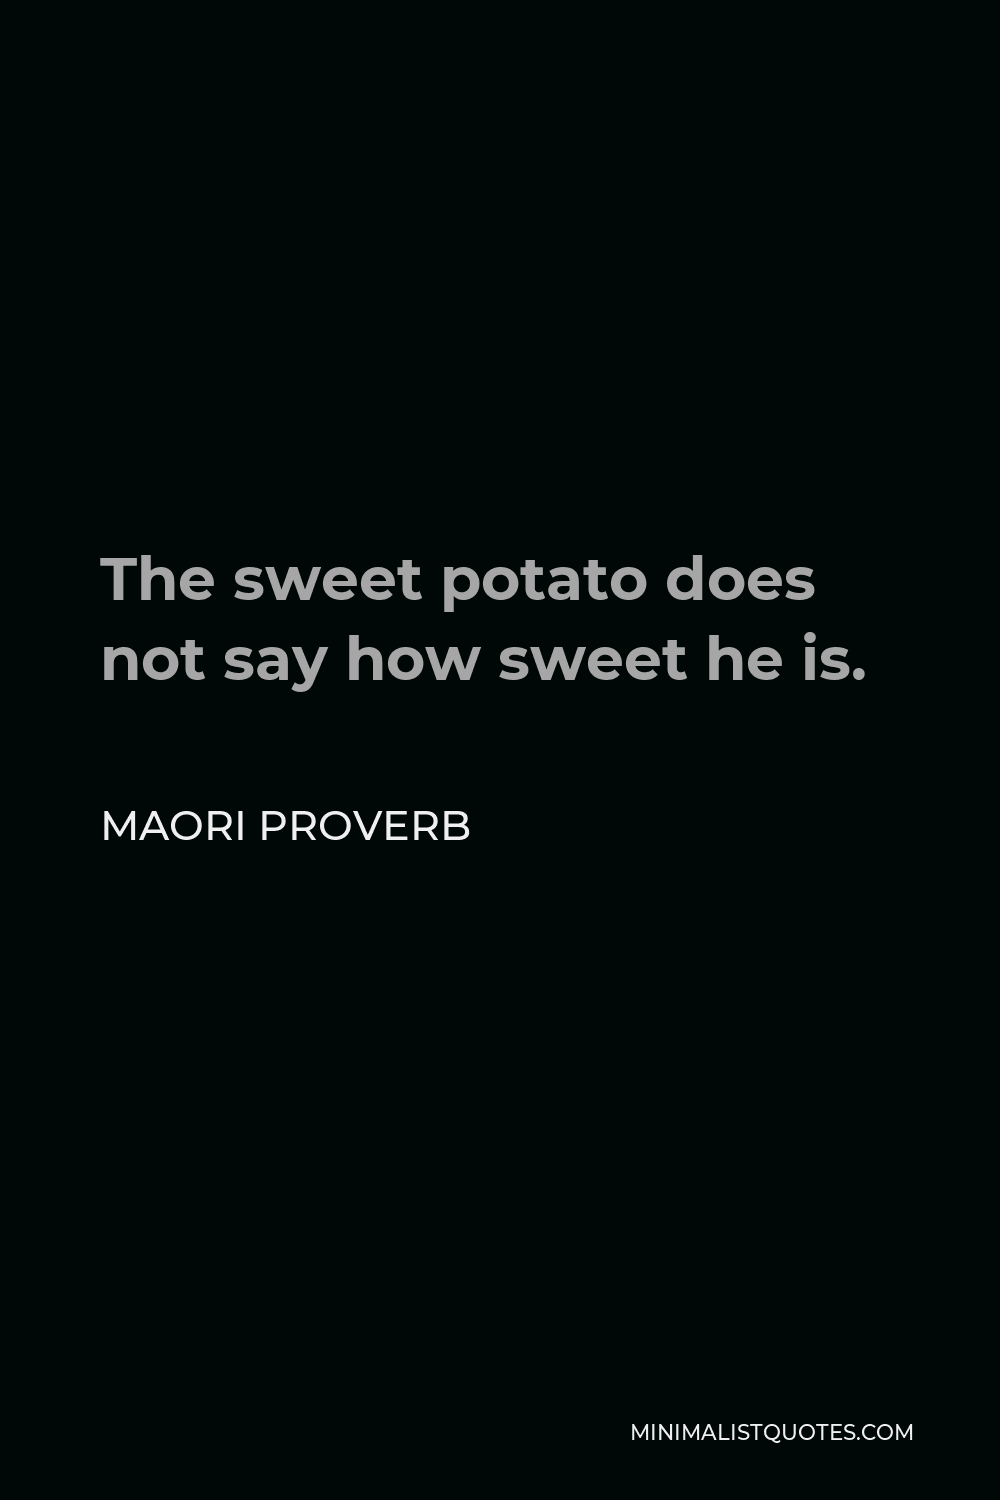 Maori Proverb Quote - The sweet potato does not say how sweet he is.